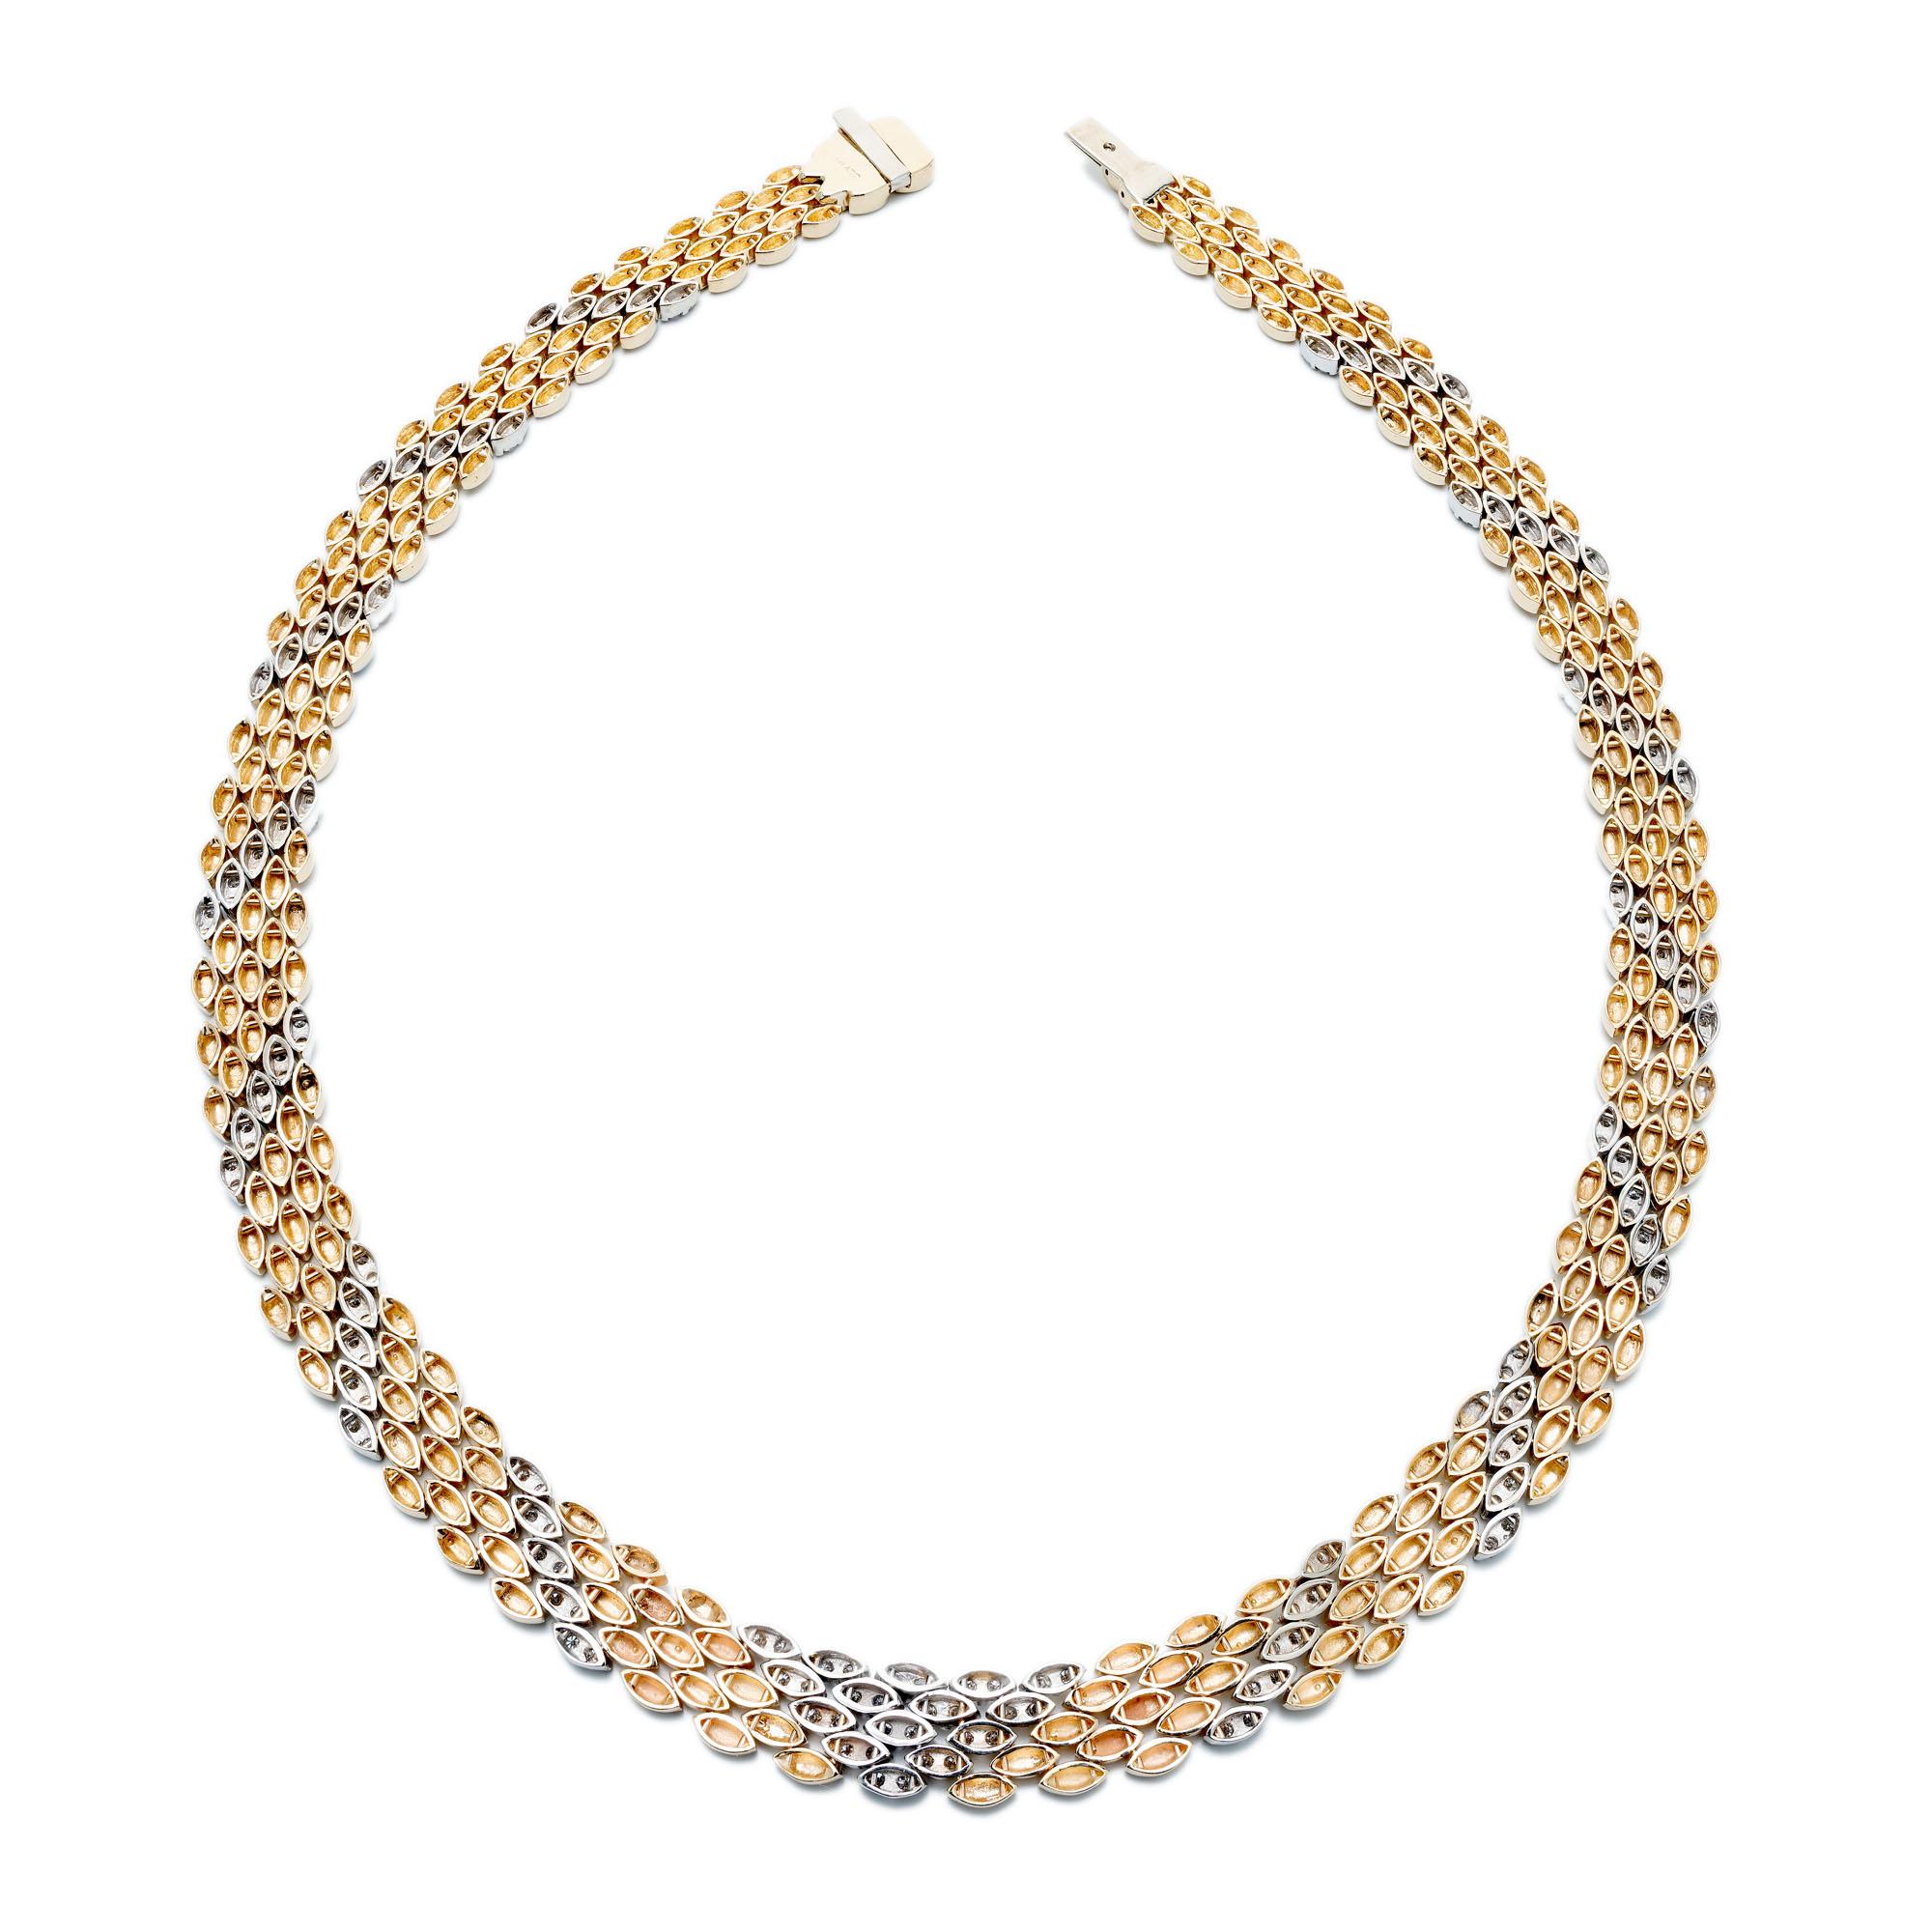 Five row panther link 14k yellow gold 18-Inch-long necklace with white gold sections accented with 170 round brilliant cut diamonds. Built in catch with underside safety.

170 round brilliant cut diamonds, H-I VS-SI approx. 3.50cts
14k yellow gold